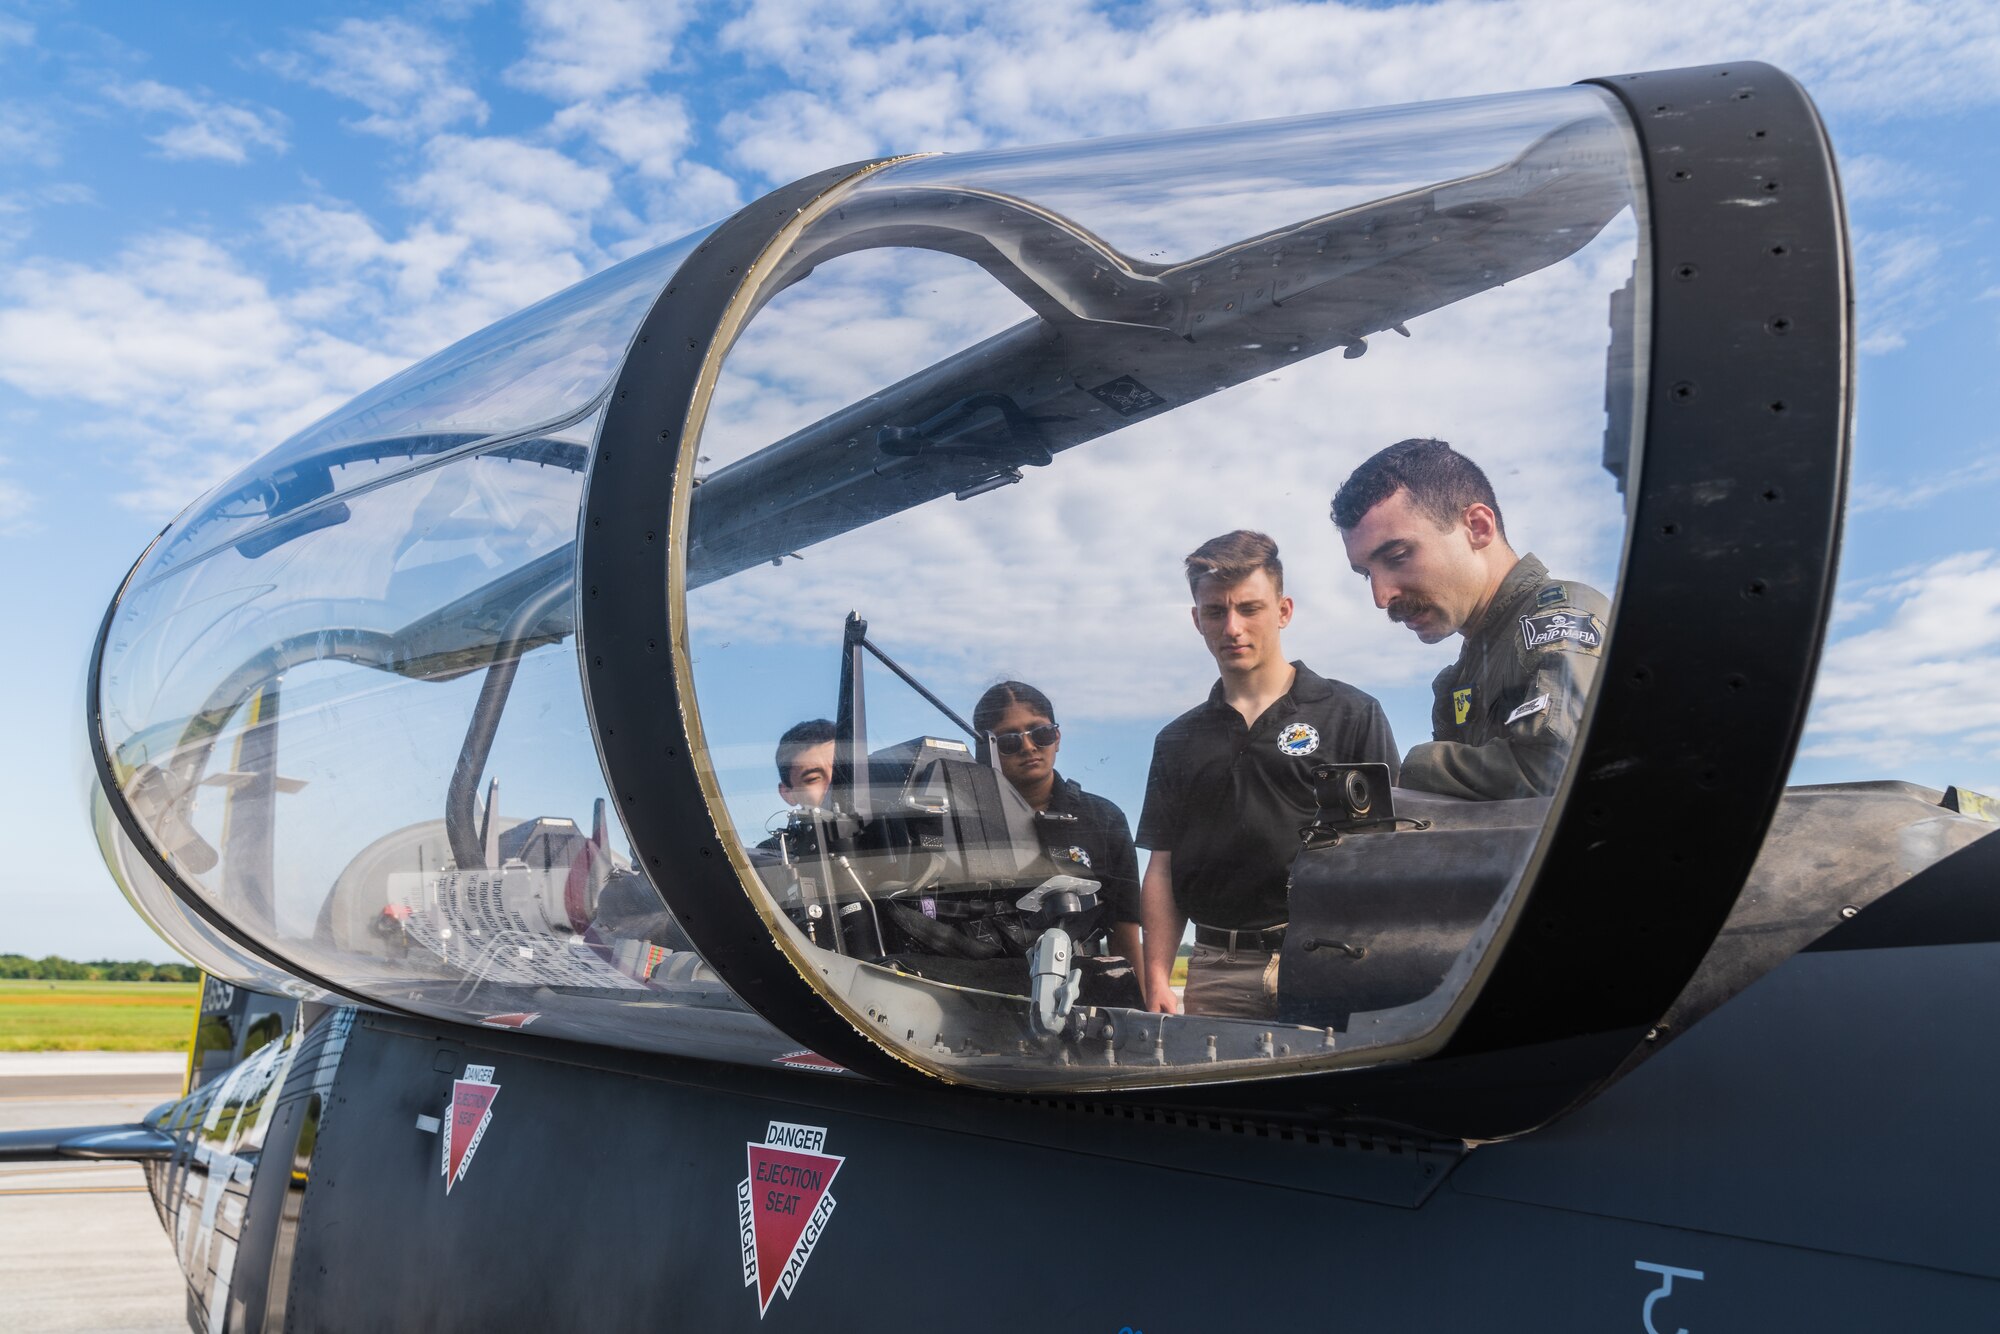 U.S. Air Force Capt. Wil Friedman, 85th Flying Training Squadron instructor pilot, right, speaks to a group of cadets during an Aviation Inspiration Mentorship event at MacDill Air Force Base, Florida, Oct 15, 2022.